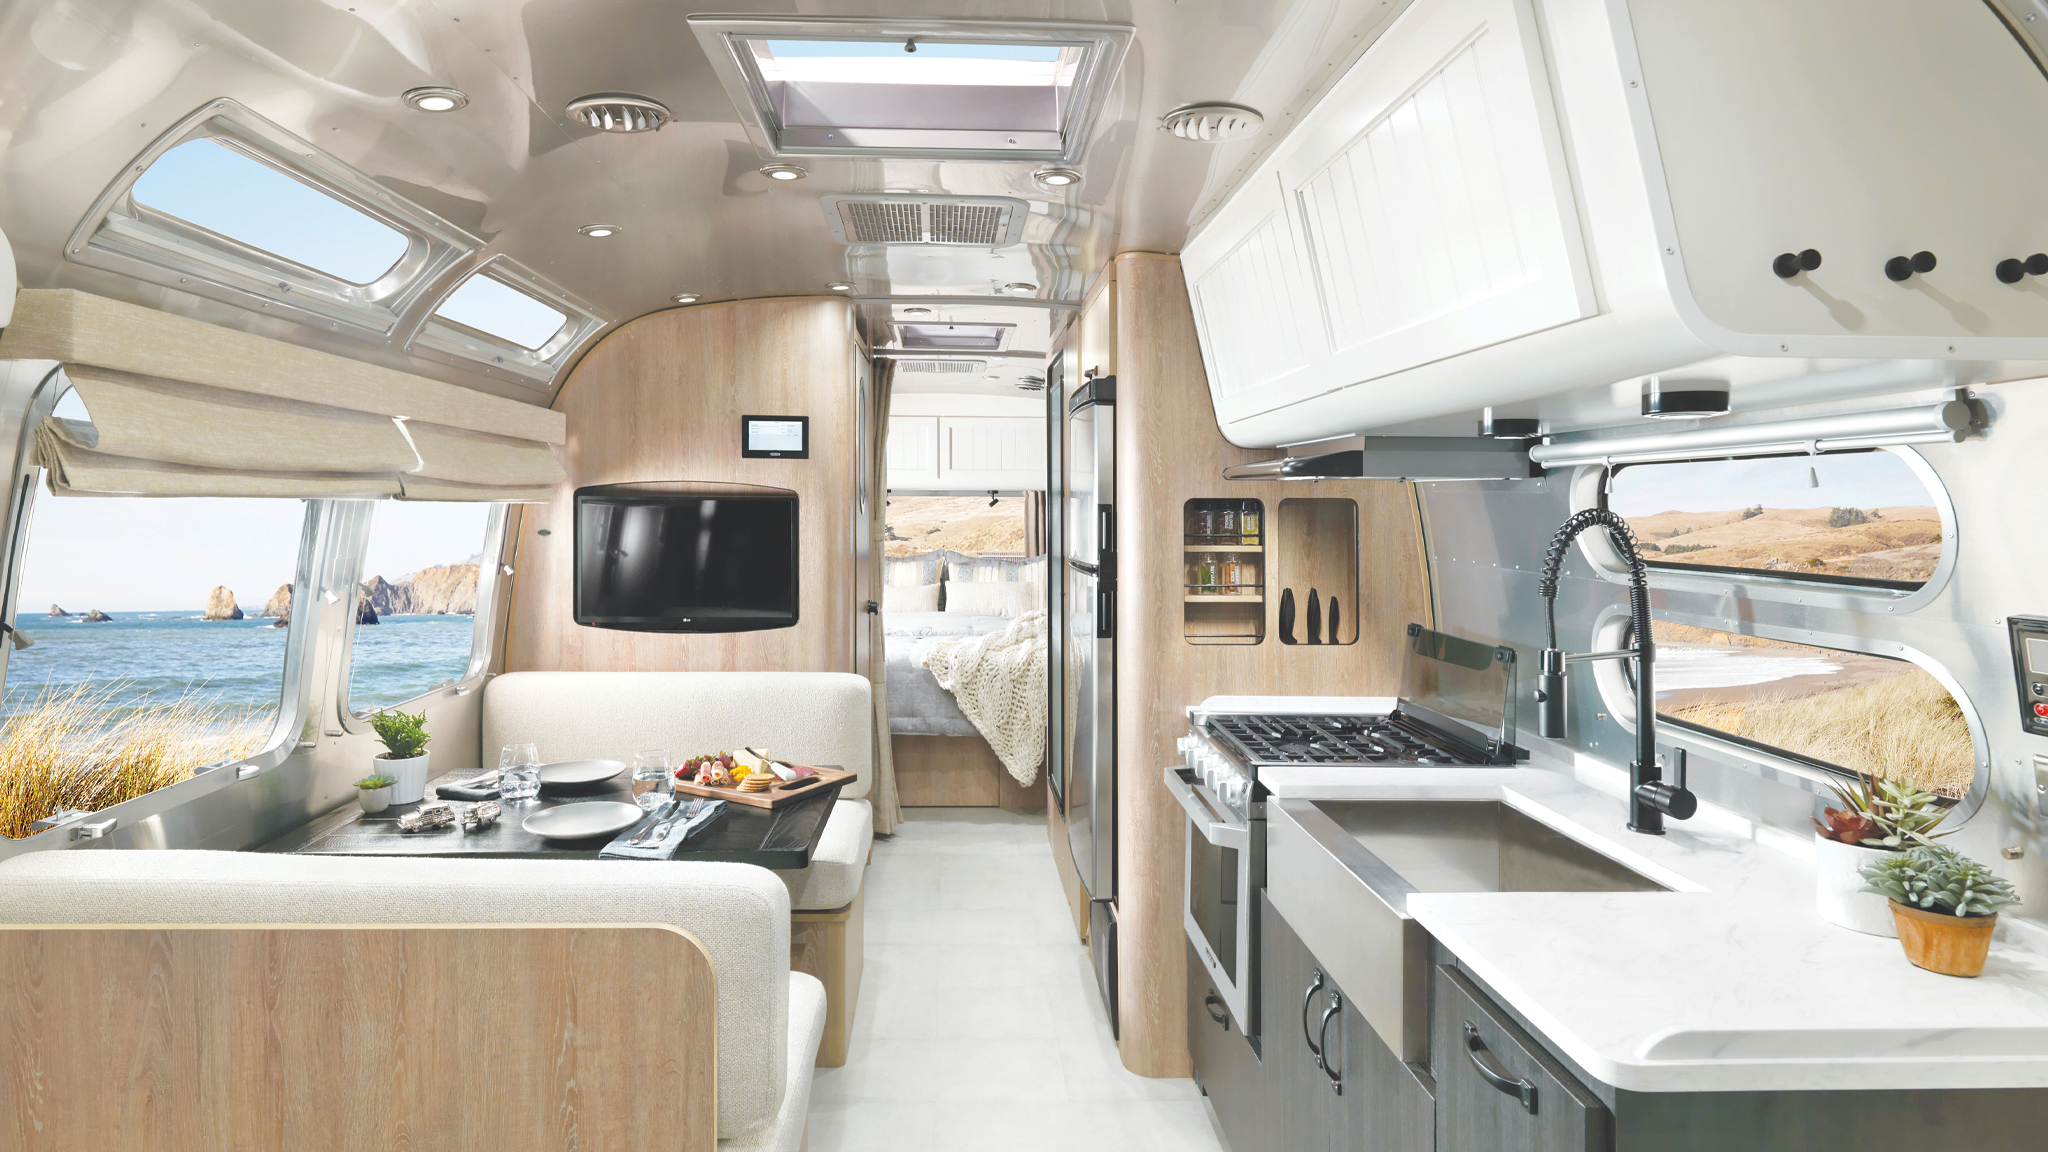 Airstream Pottery Barn Special Edition Travel Trailer interior image of kitchen, dining space, and bedroom